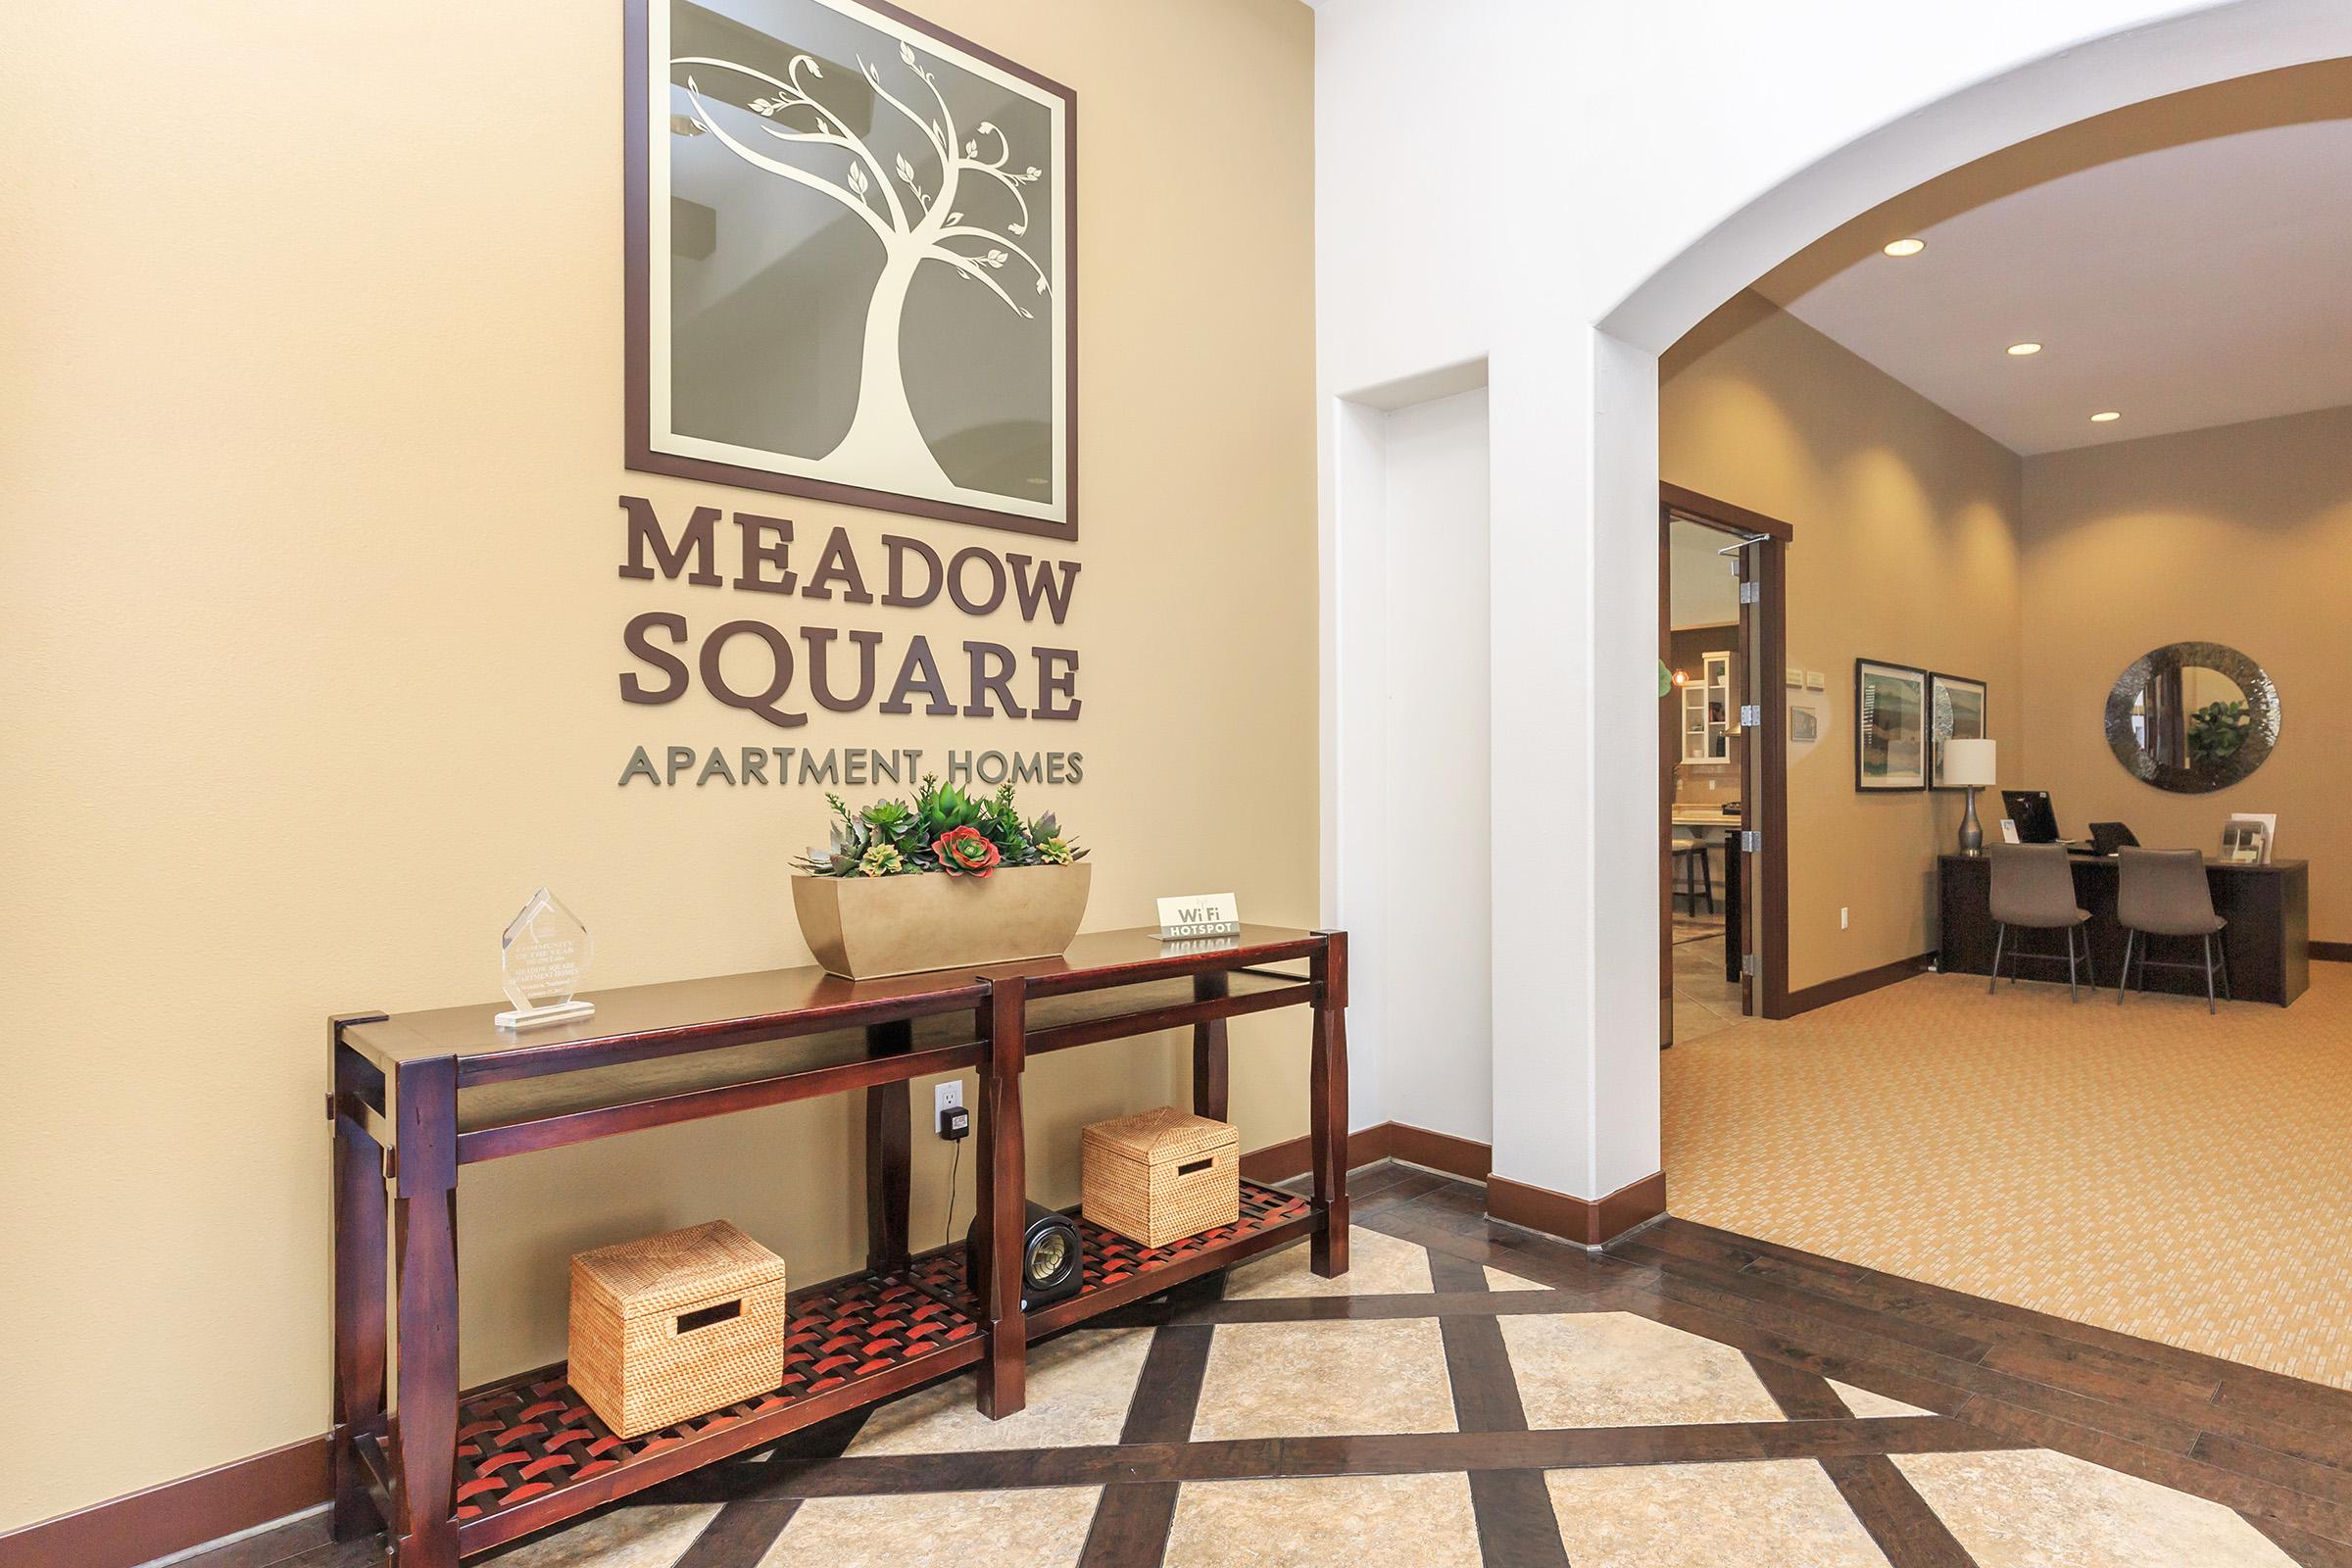 Meadow Square Apartment Homes leasing office entry way